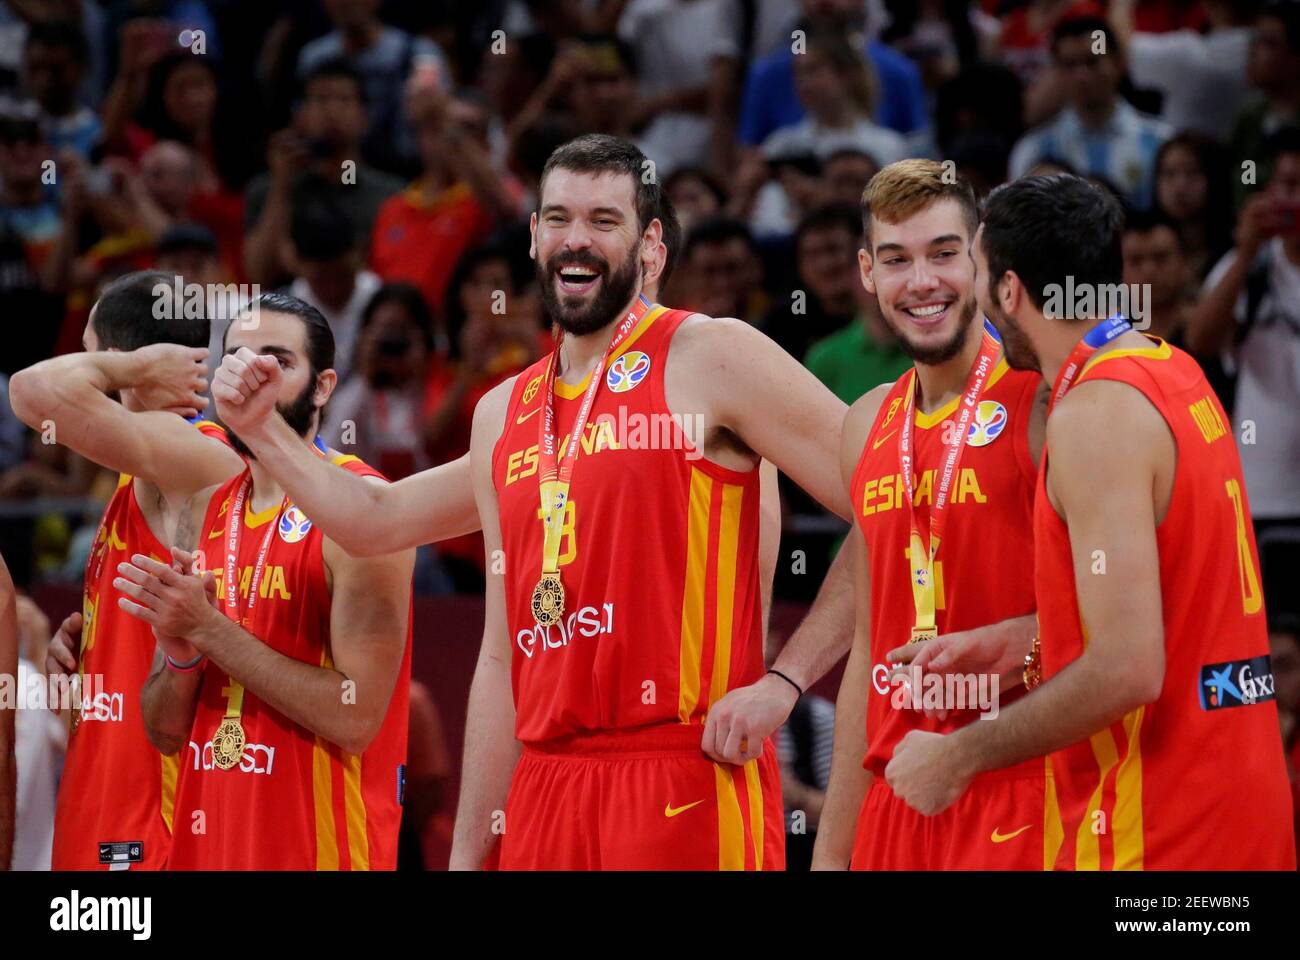 Basketball - FIBA World Cup - Final - Argentina v Spain - Wukesong Sport Arena, Beijing, China - September 15, 2019  Spain's Marc Gasol and team mates celebrate with medals after winning the FIBA World Cup  REUTERS/Jason Lee Stock Photo